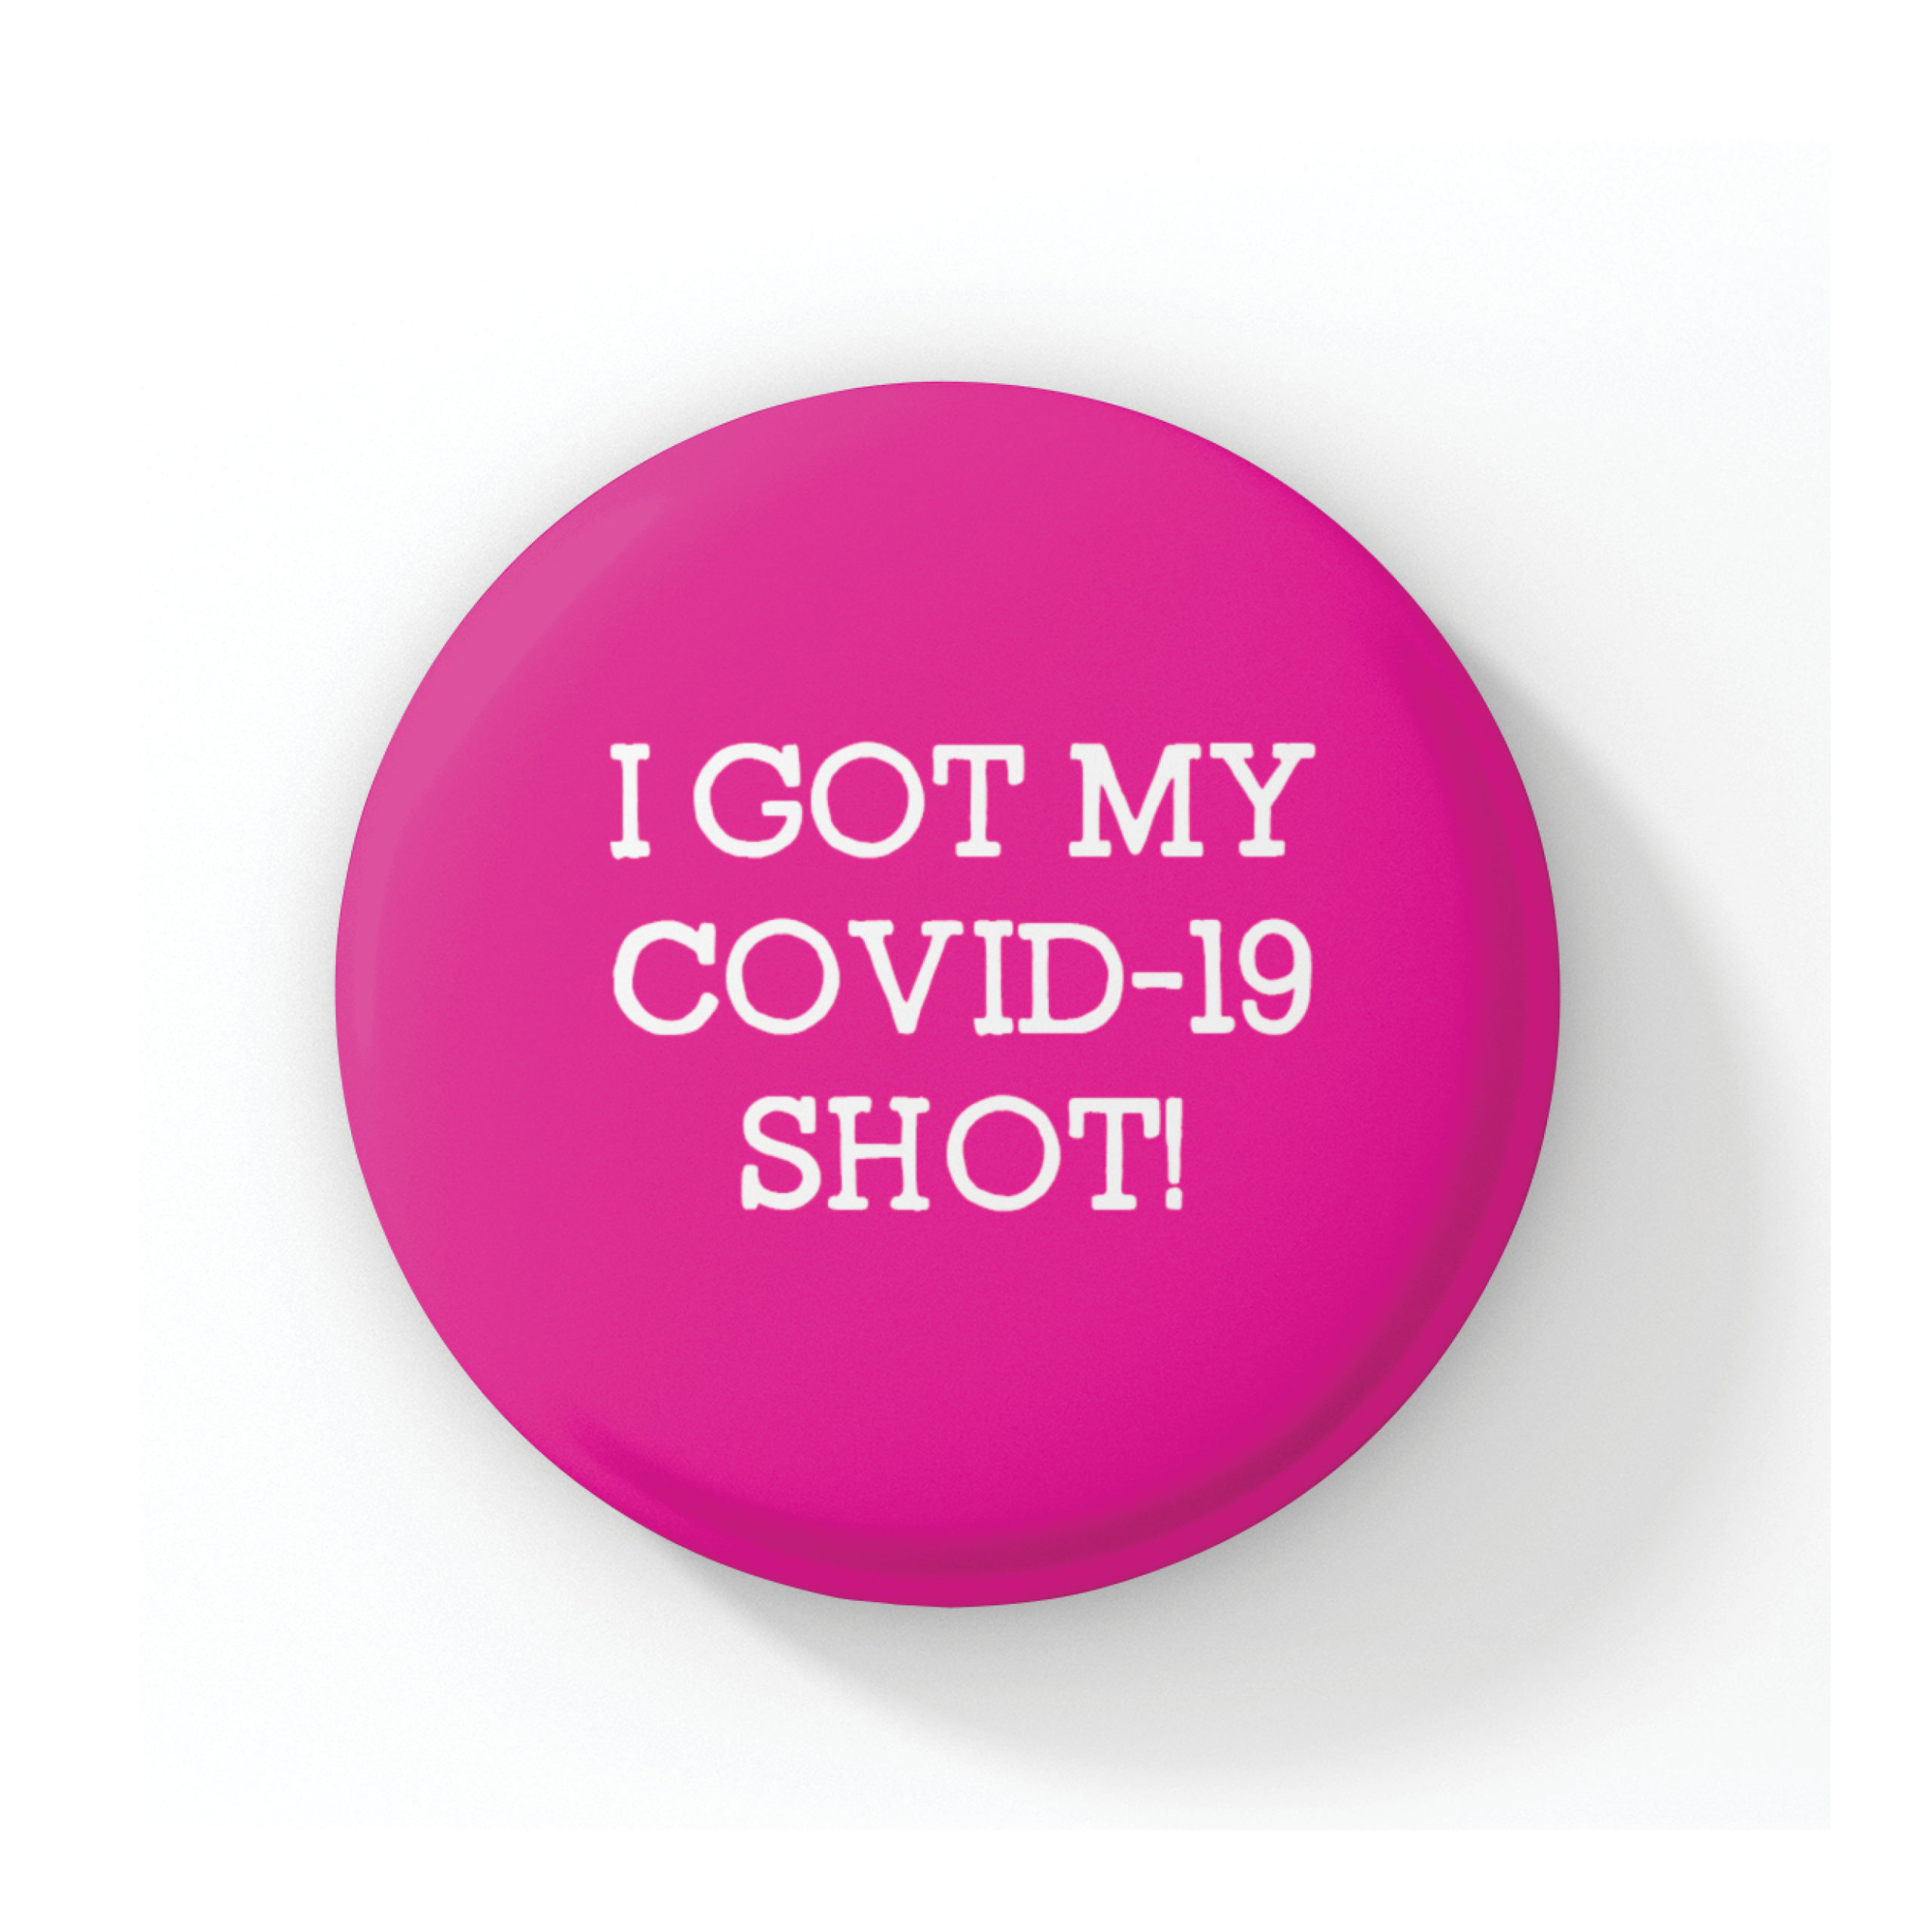 COVID-19 Vaccine Button - Colorful Hot Pink